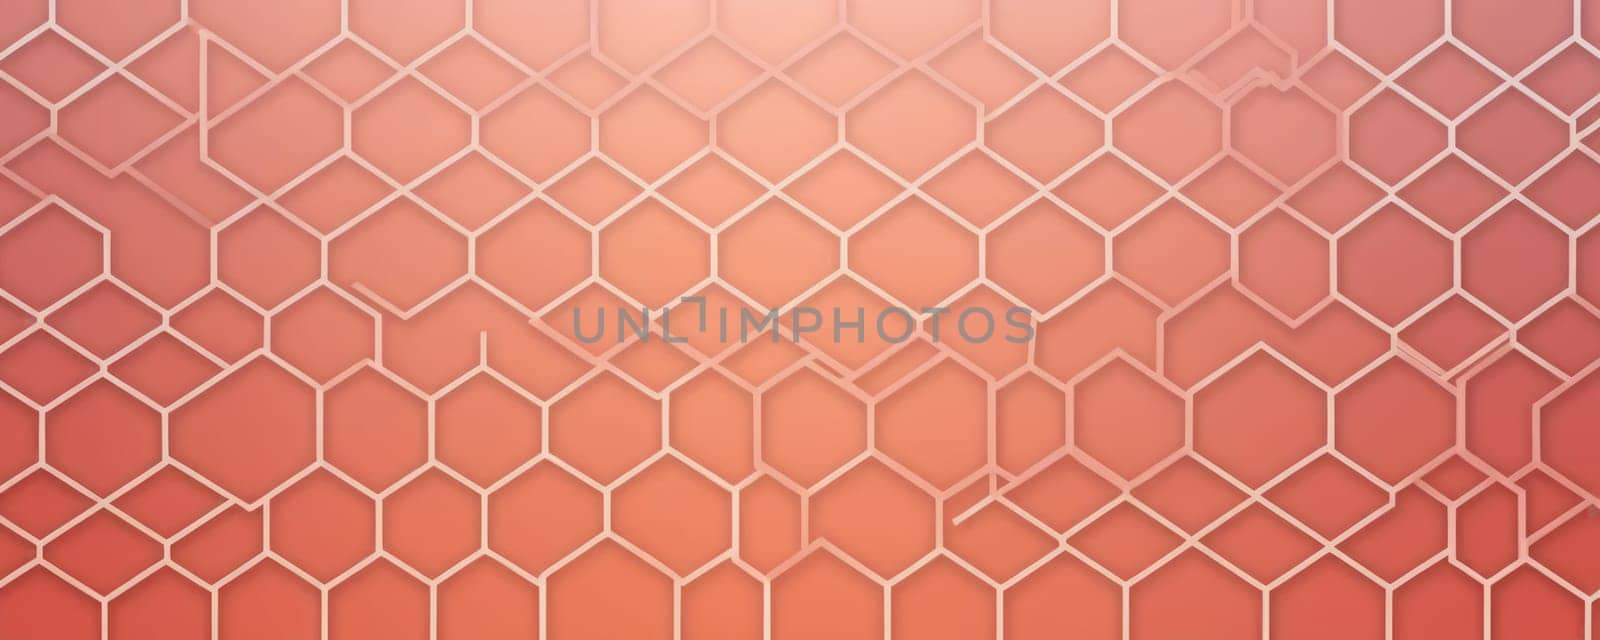 Lattice Shapes in White and Light coral by nkotlyar